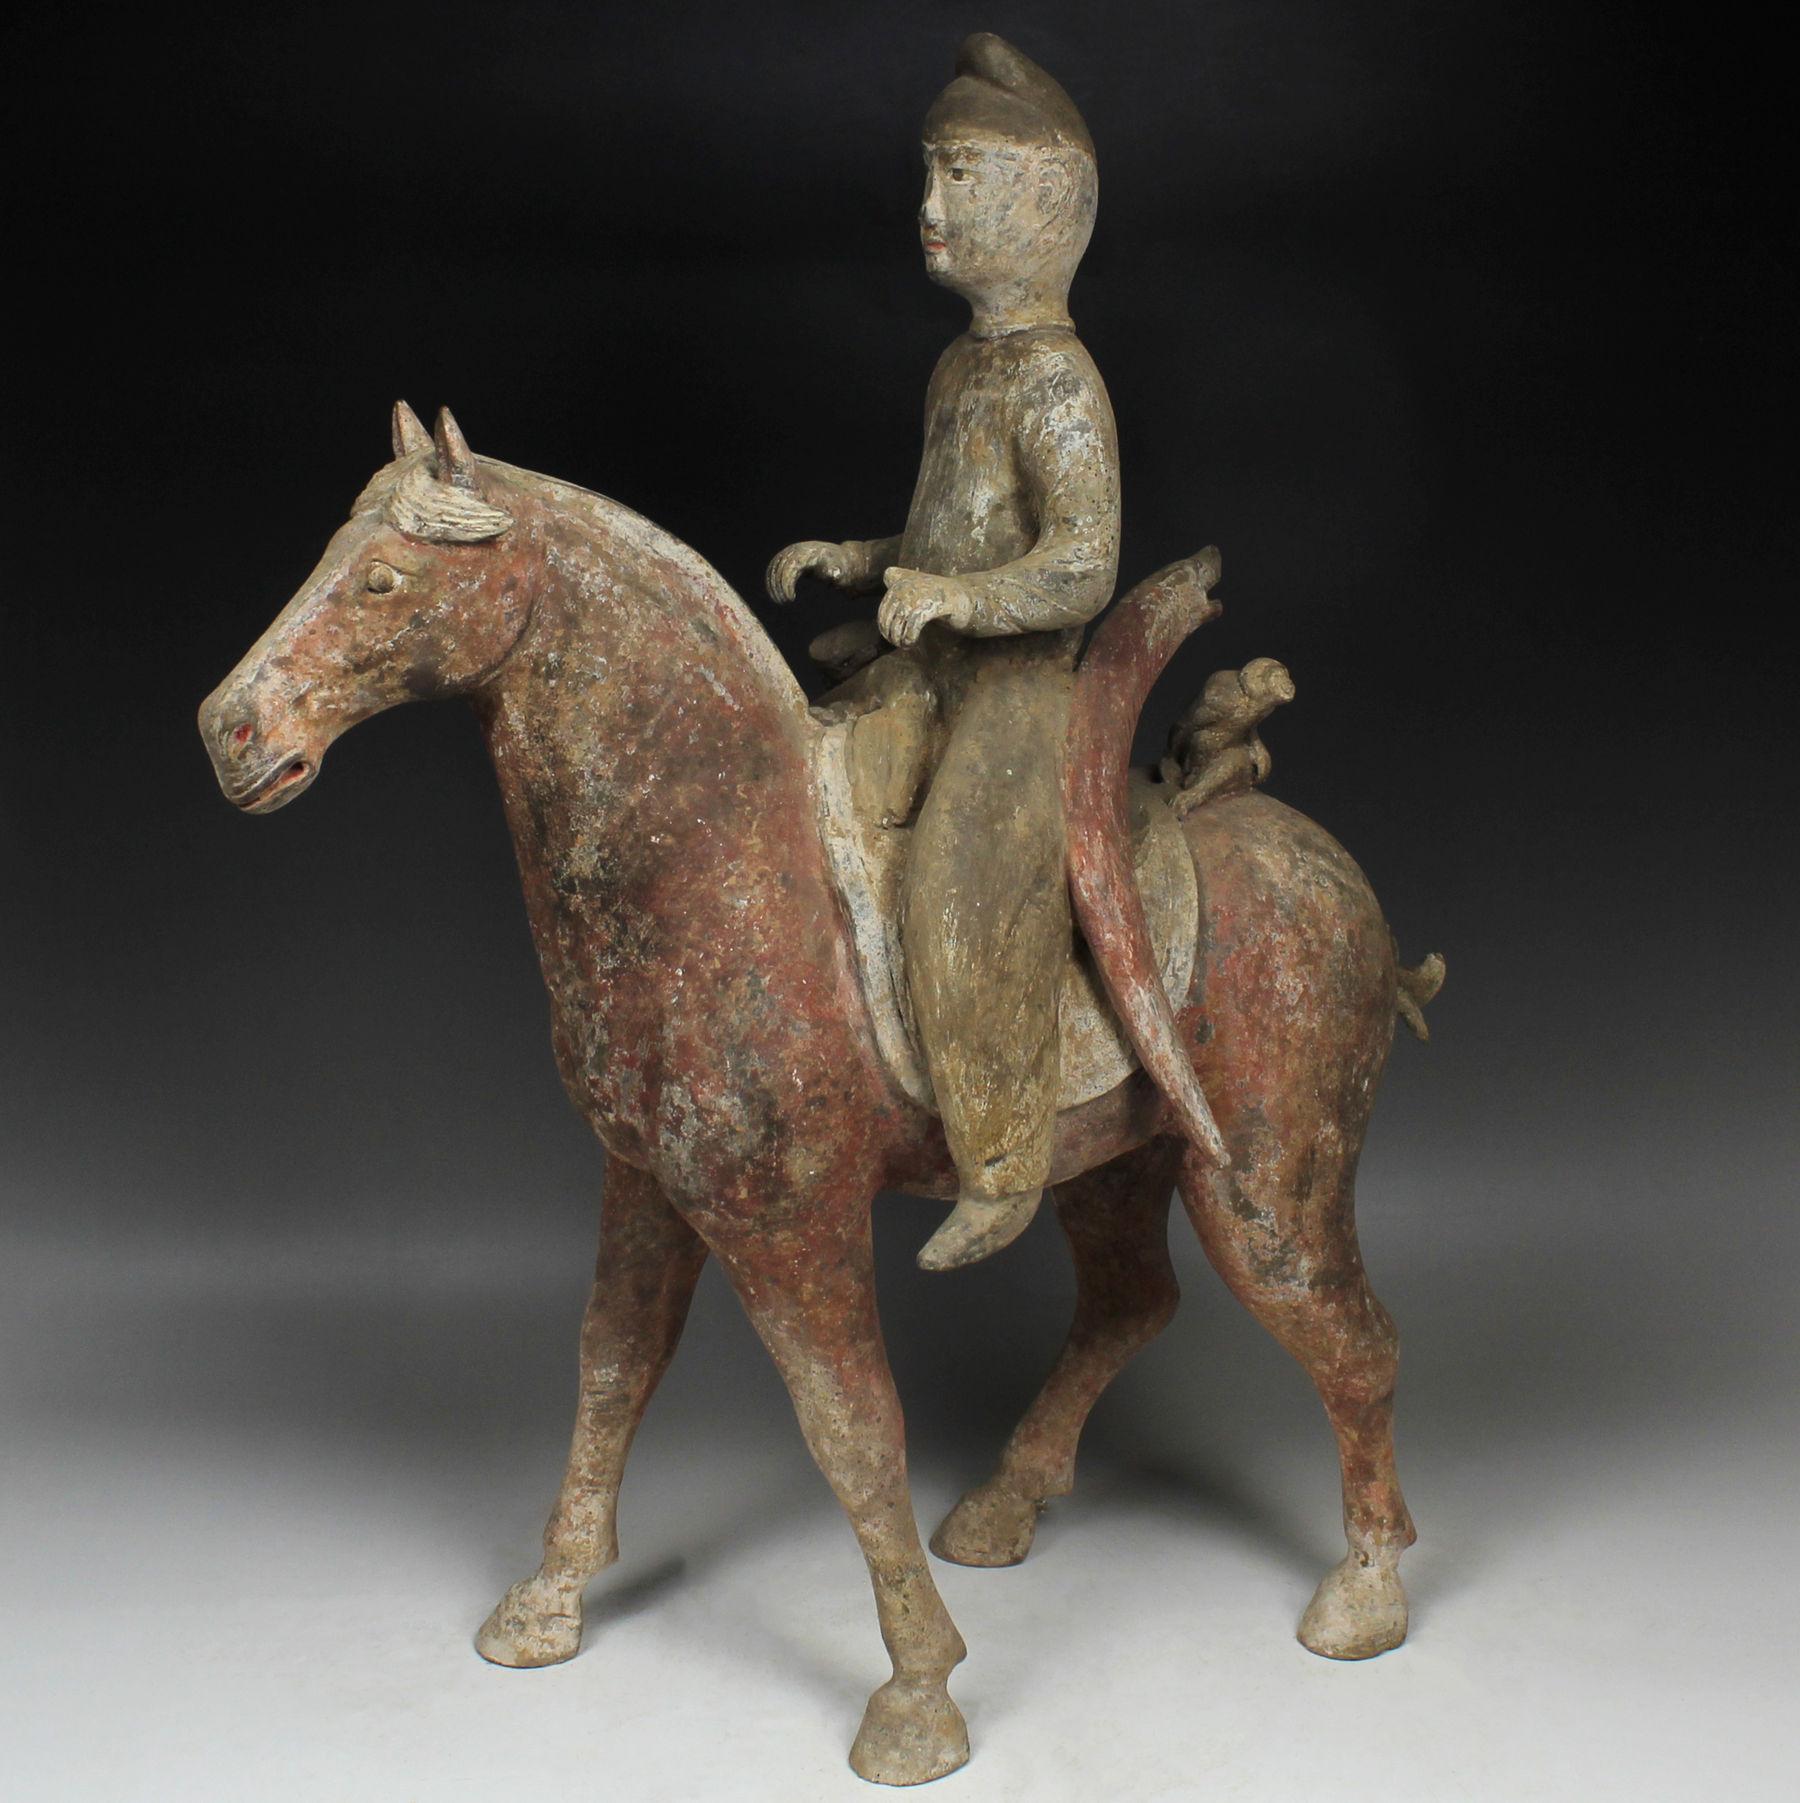 ITEM: Statuette of a horse with rider
MATERIAL: Pottery
CULTURE: Chinese, Tang Dynasty
PERIOD: 618 – 907 A.D
DIMENSIONS: 520 mm x 420 mm x 180 mm
CONDITION: Good condition. Includes Thermoluminescence test by Laboratory Kotalla (Reference